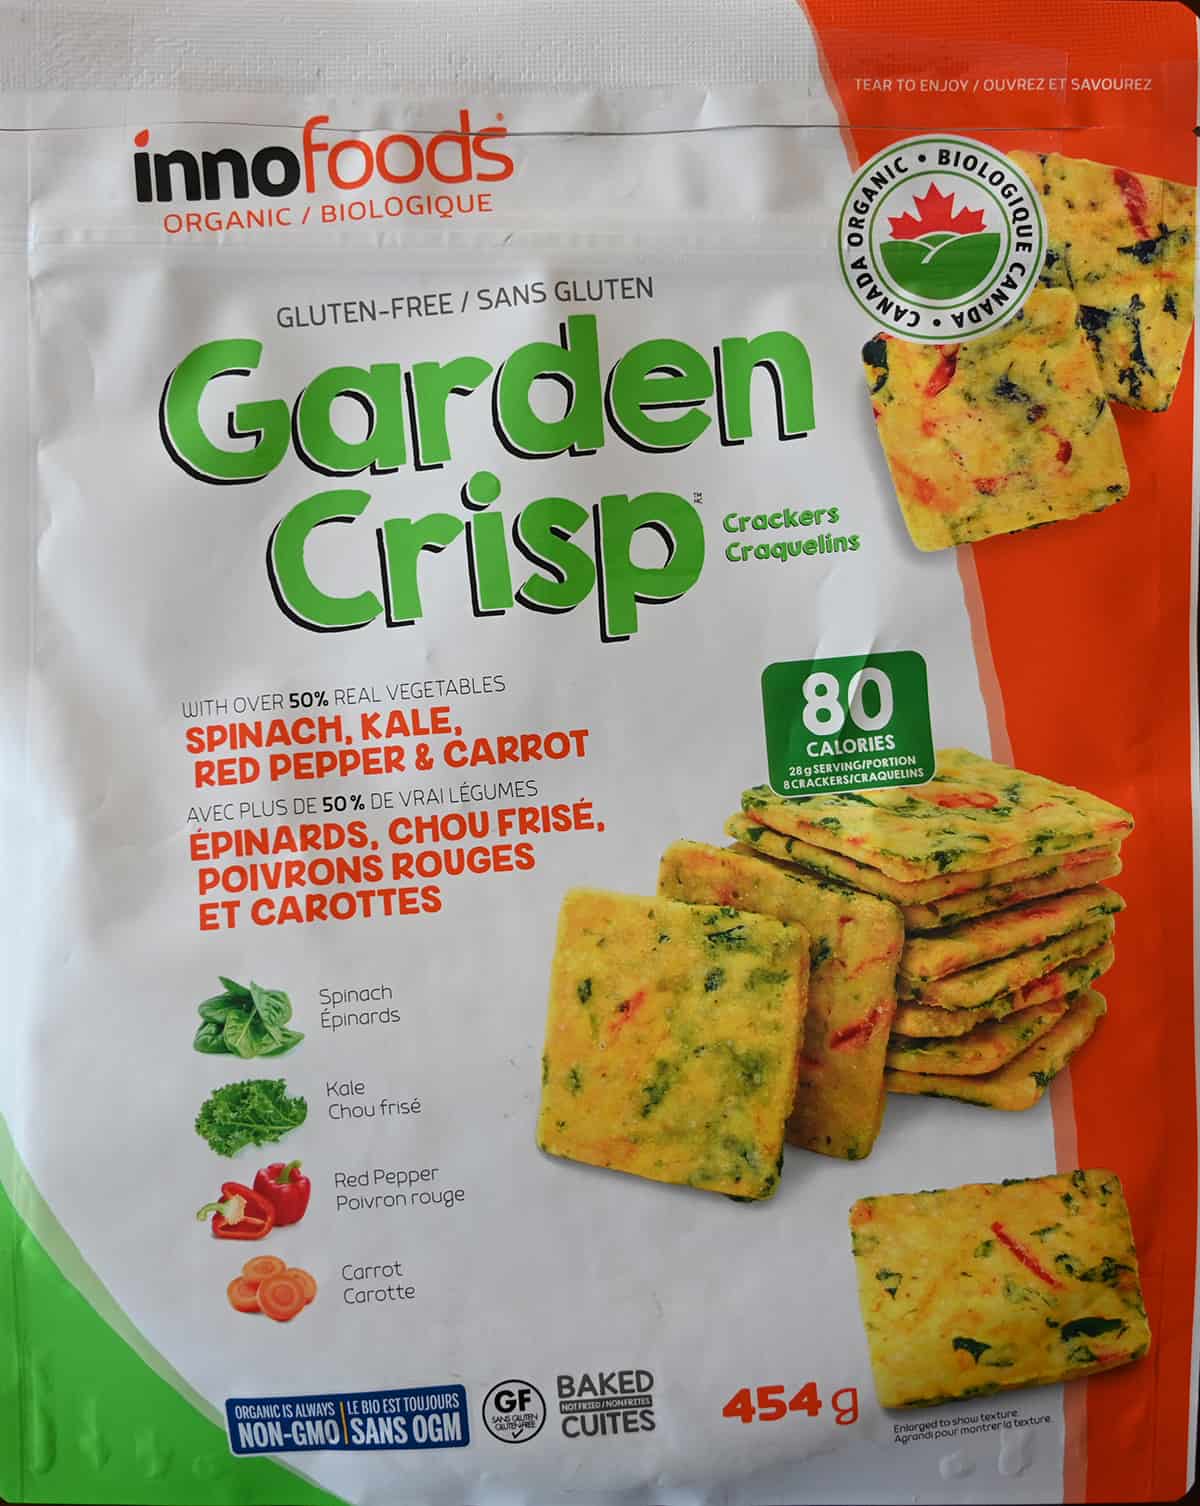 Closeup image of the front of the bag of Innofoods Garden Crsip Crackers.